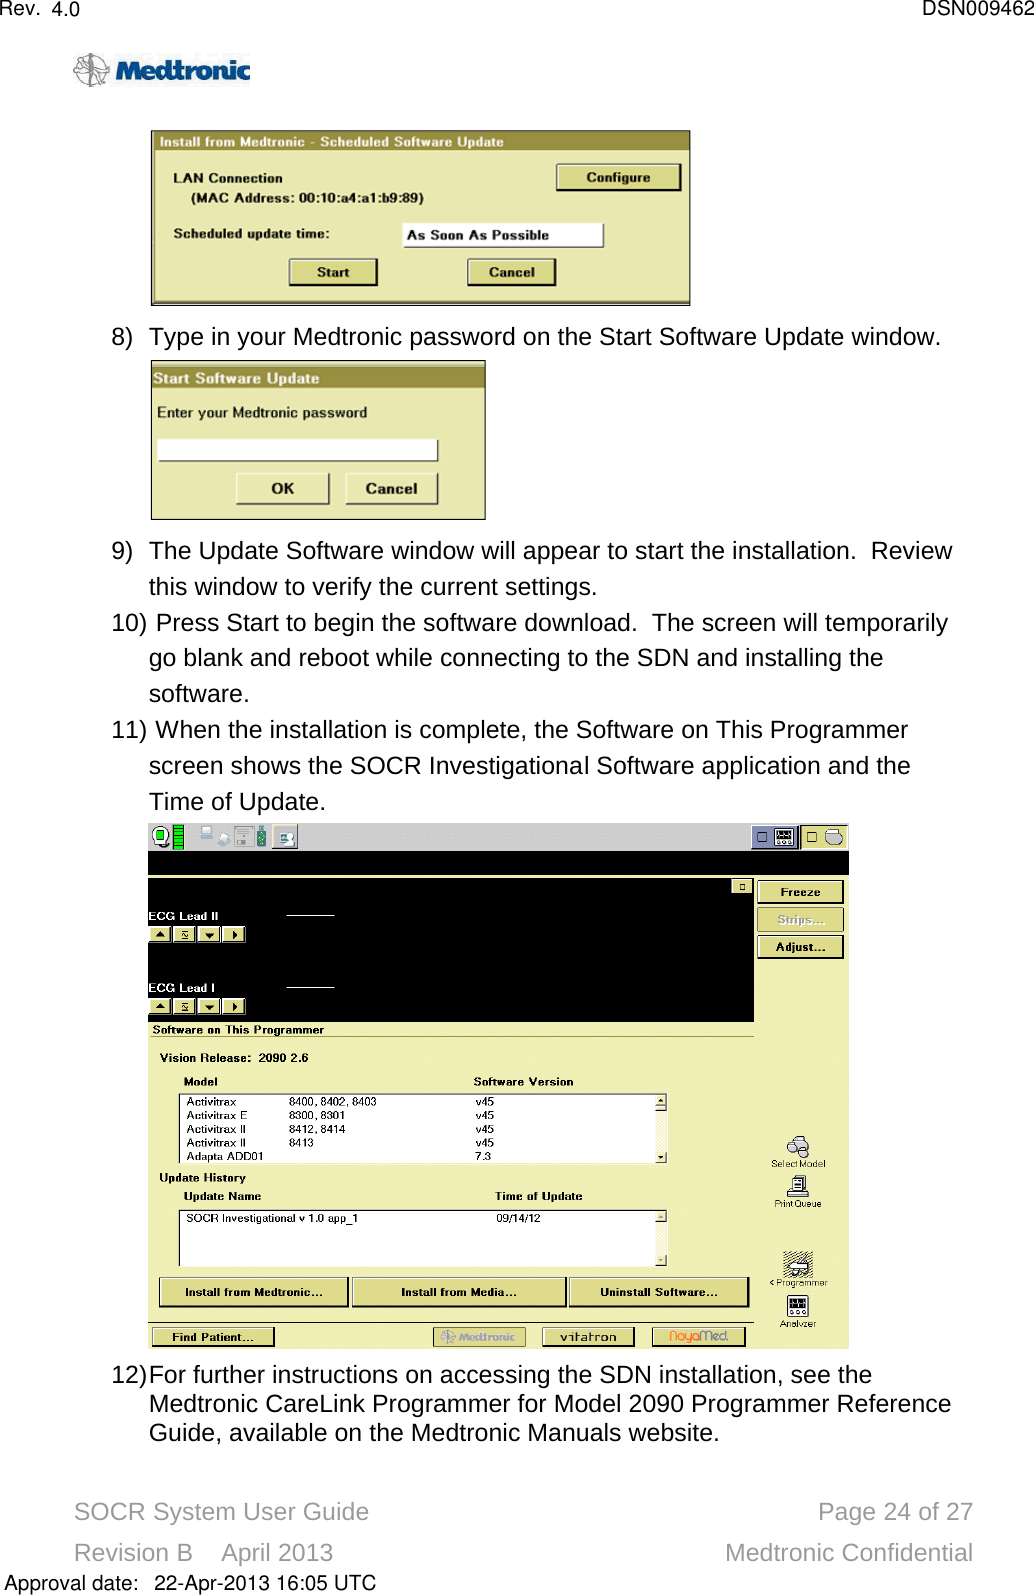 SOCR System User Guide Page 24 of 27Revision B    April 2013 Medtronic Confidential8) Type in your Medtronic password on the Start Software Update window.9) The Update Software window will appear to start the installation.  Review this window to verify the current settings.10) Press Start to begin the software download.  The screen will temporarily go blank and reboot while connecting to the SDN and installing the software. 11) When the installation is complete, the Software on This Programmer screen shows the SOCR Investigational Software application and the Time of Update.12)For further instructions on accessing the SDN installation, see the Medtronic CareLink Programmer for Model 2090 Programmer Reference Guide, available on the Medtronic Manuals website. Approval date:4.0 DSN00946222-Apr-2013 16:05 UTCRev.